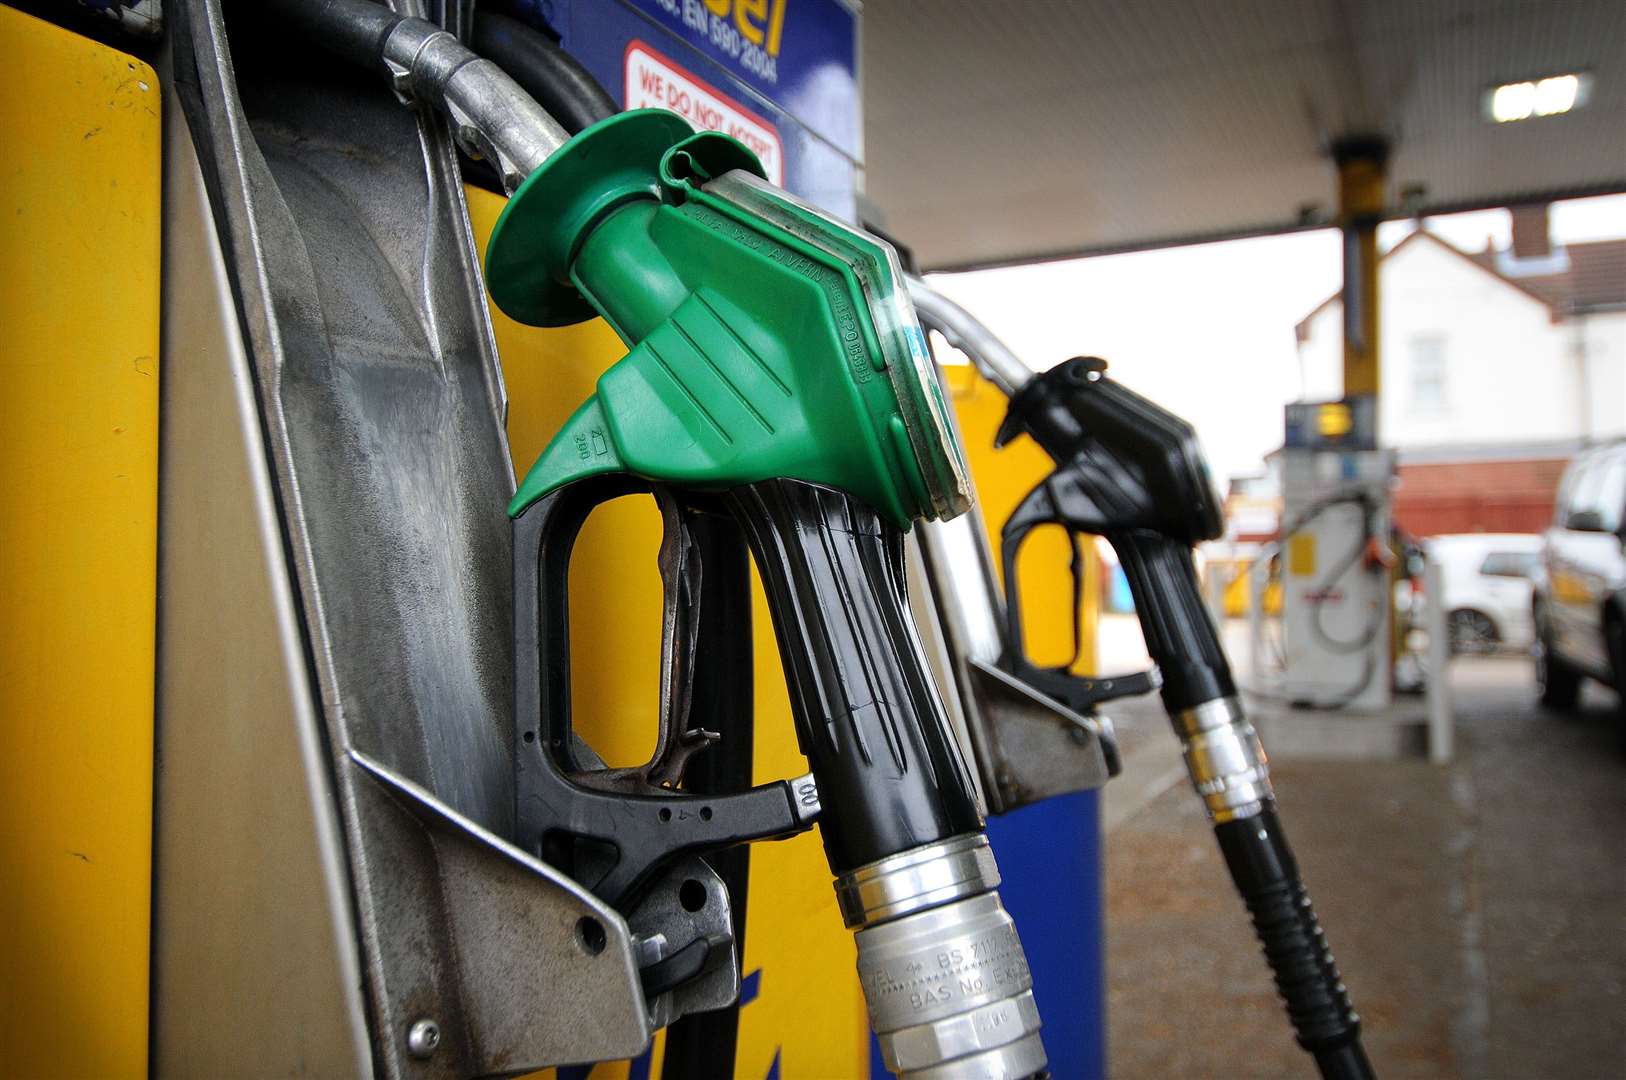 People driving off forecourts without paying cost retailers around £20 million a year